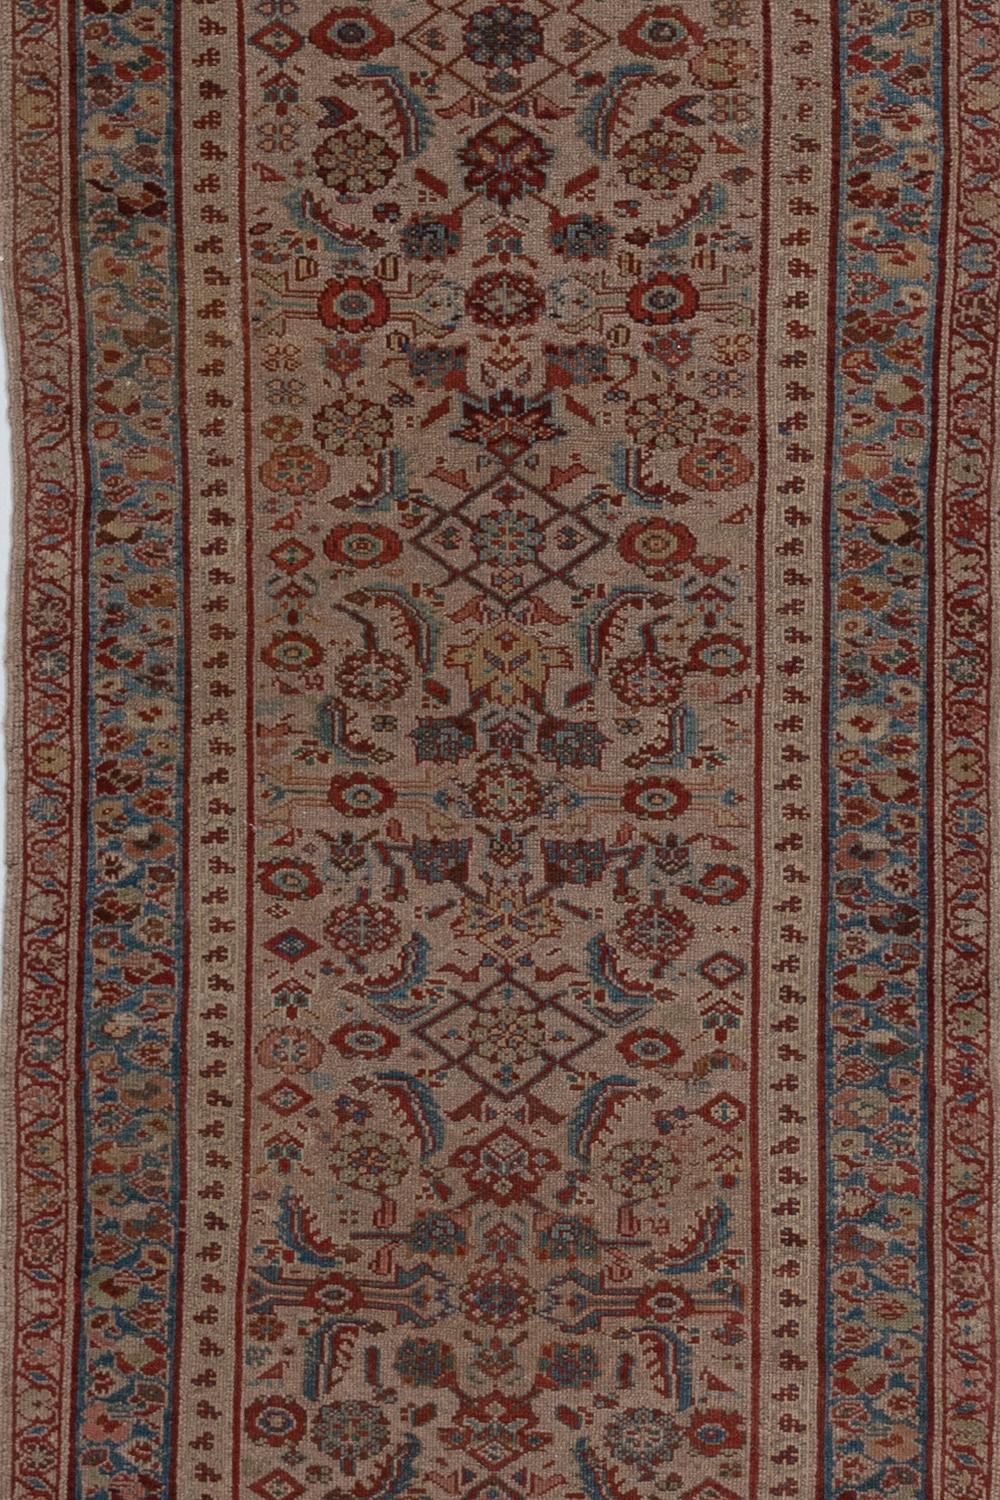 Vintage Persian Runner

Pile: Low worn

Good condition. Beautiful warm camel field with all over herati pattern. Faded soft reds and blue tones. 

Wear notes: none

Wear Guide:
Vintage and antique rugs are by nature, pre-loved and may show